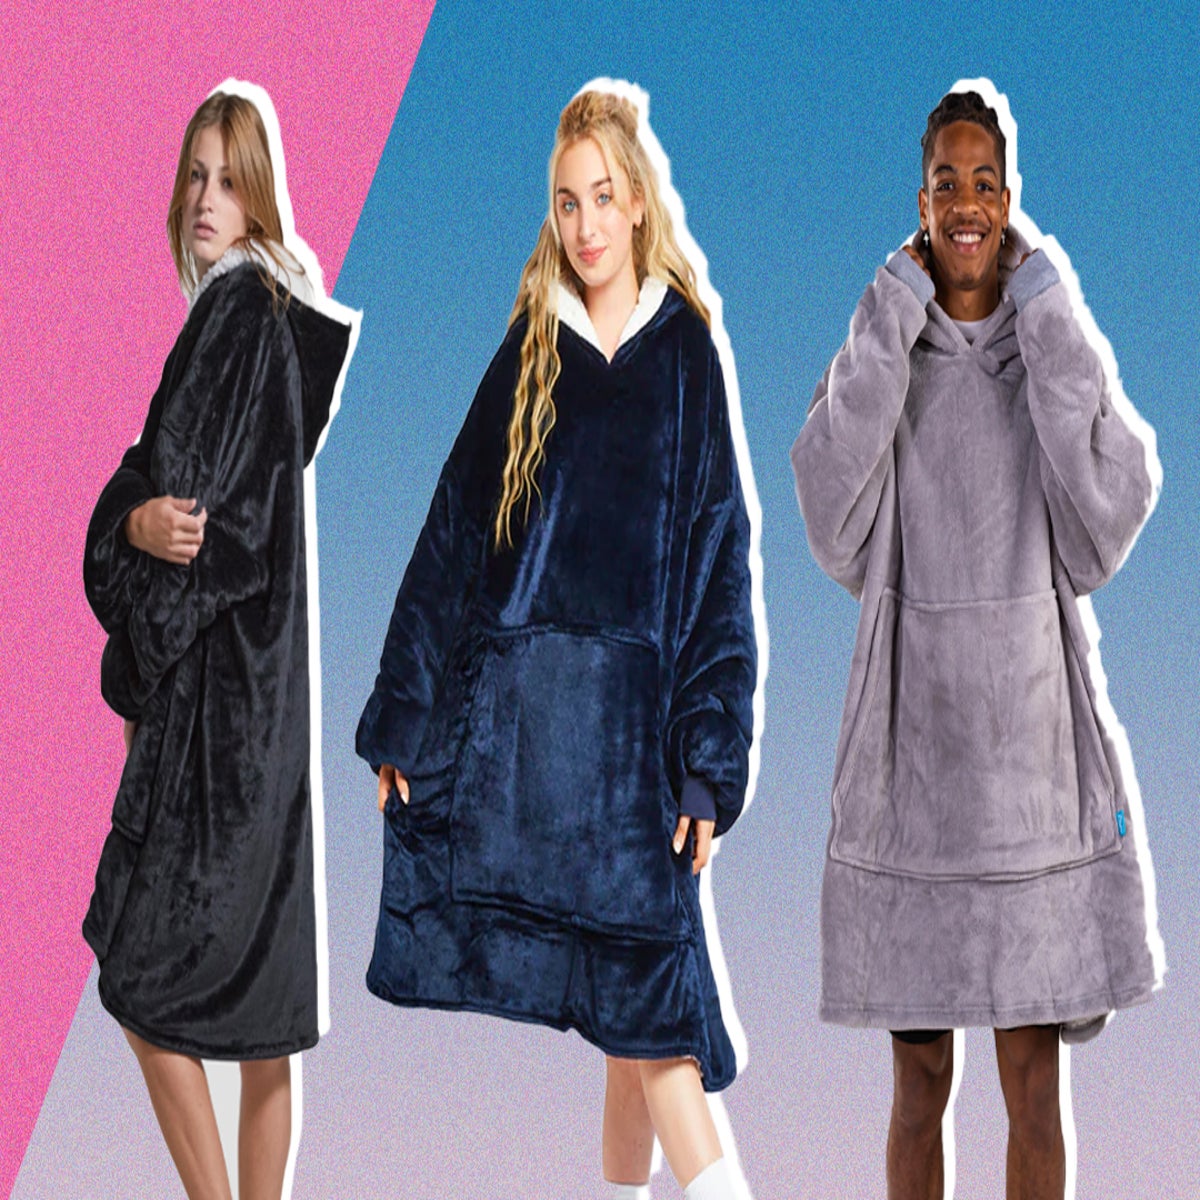 10 Of The Comfiest Oversized Hoodies To Lounge In